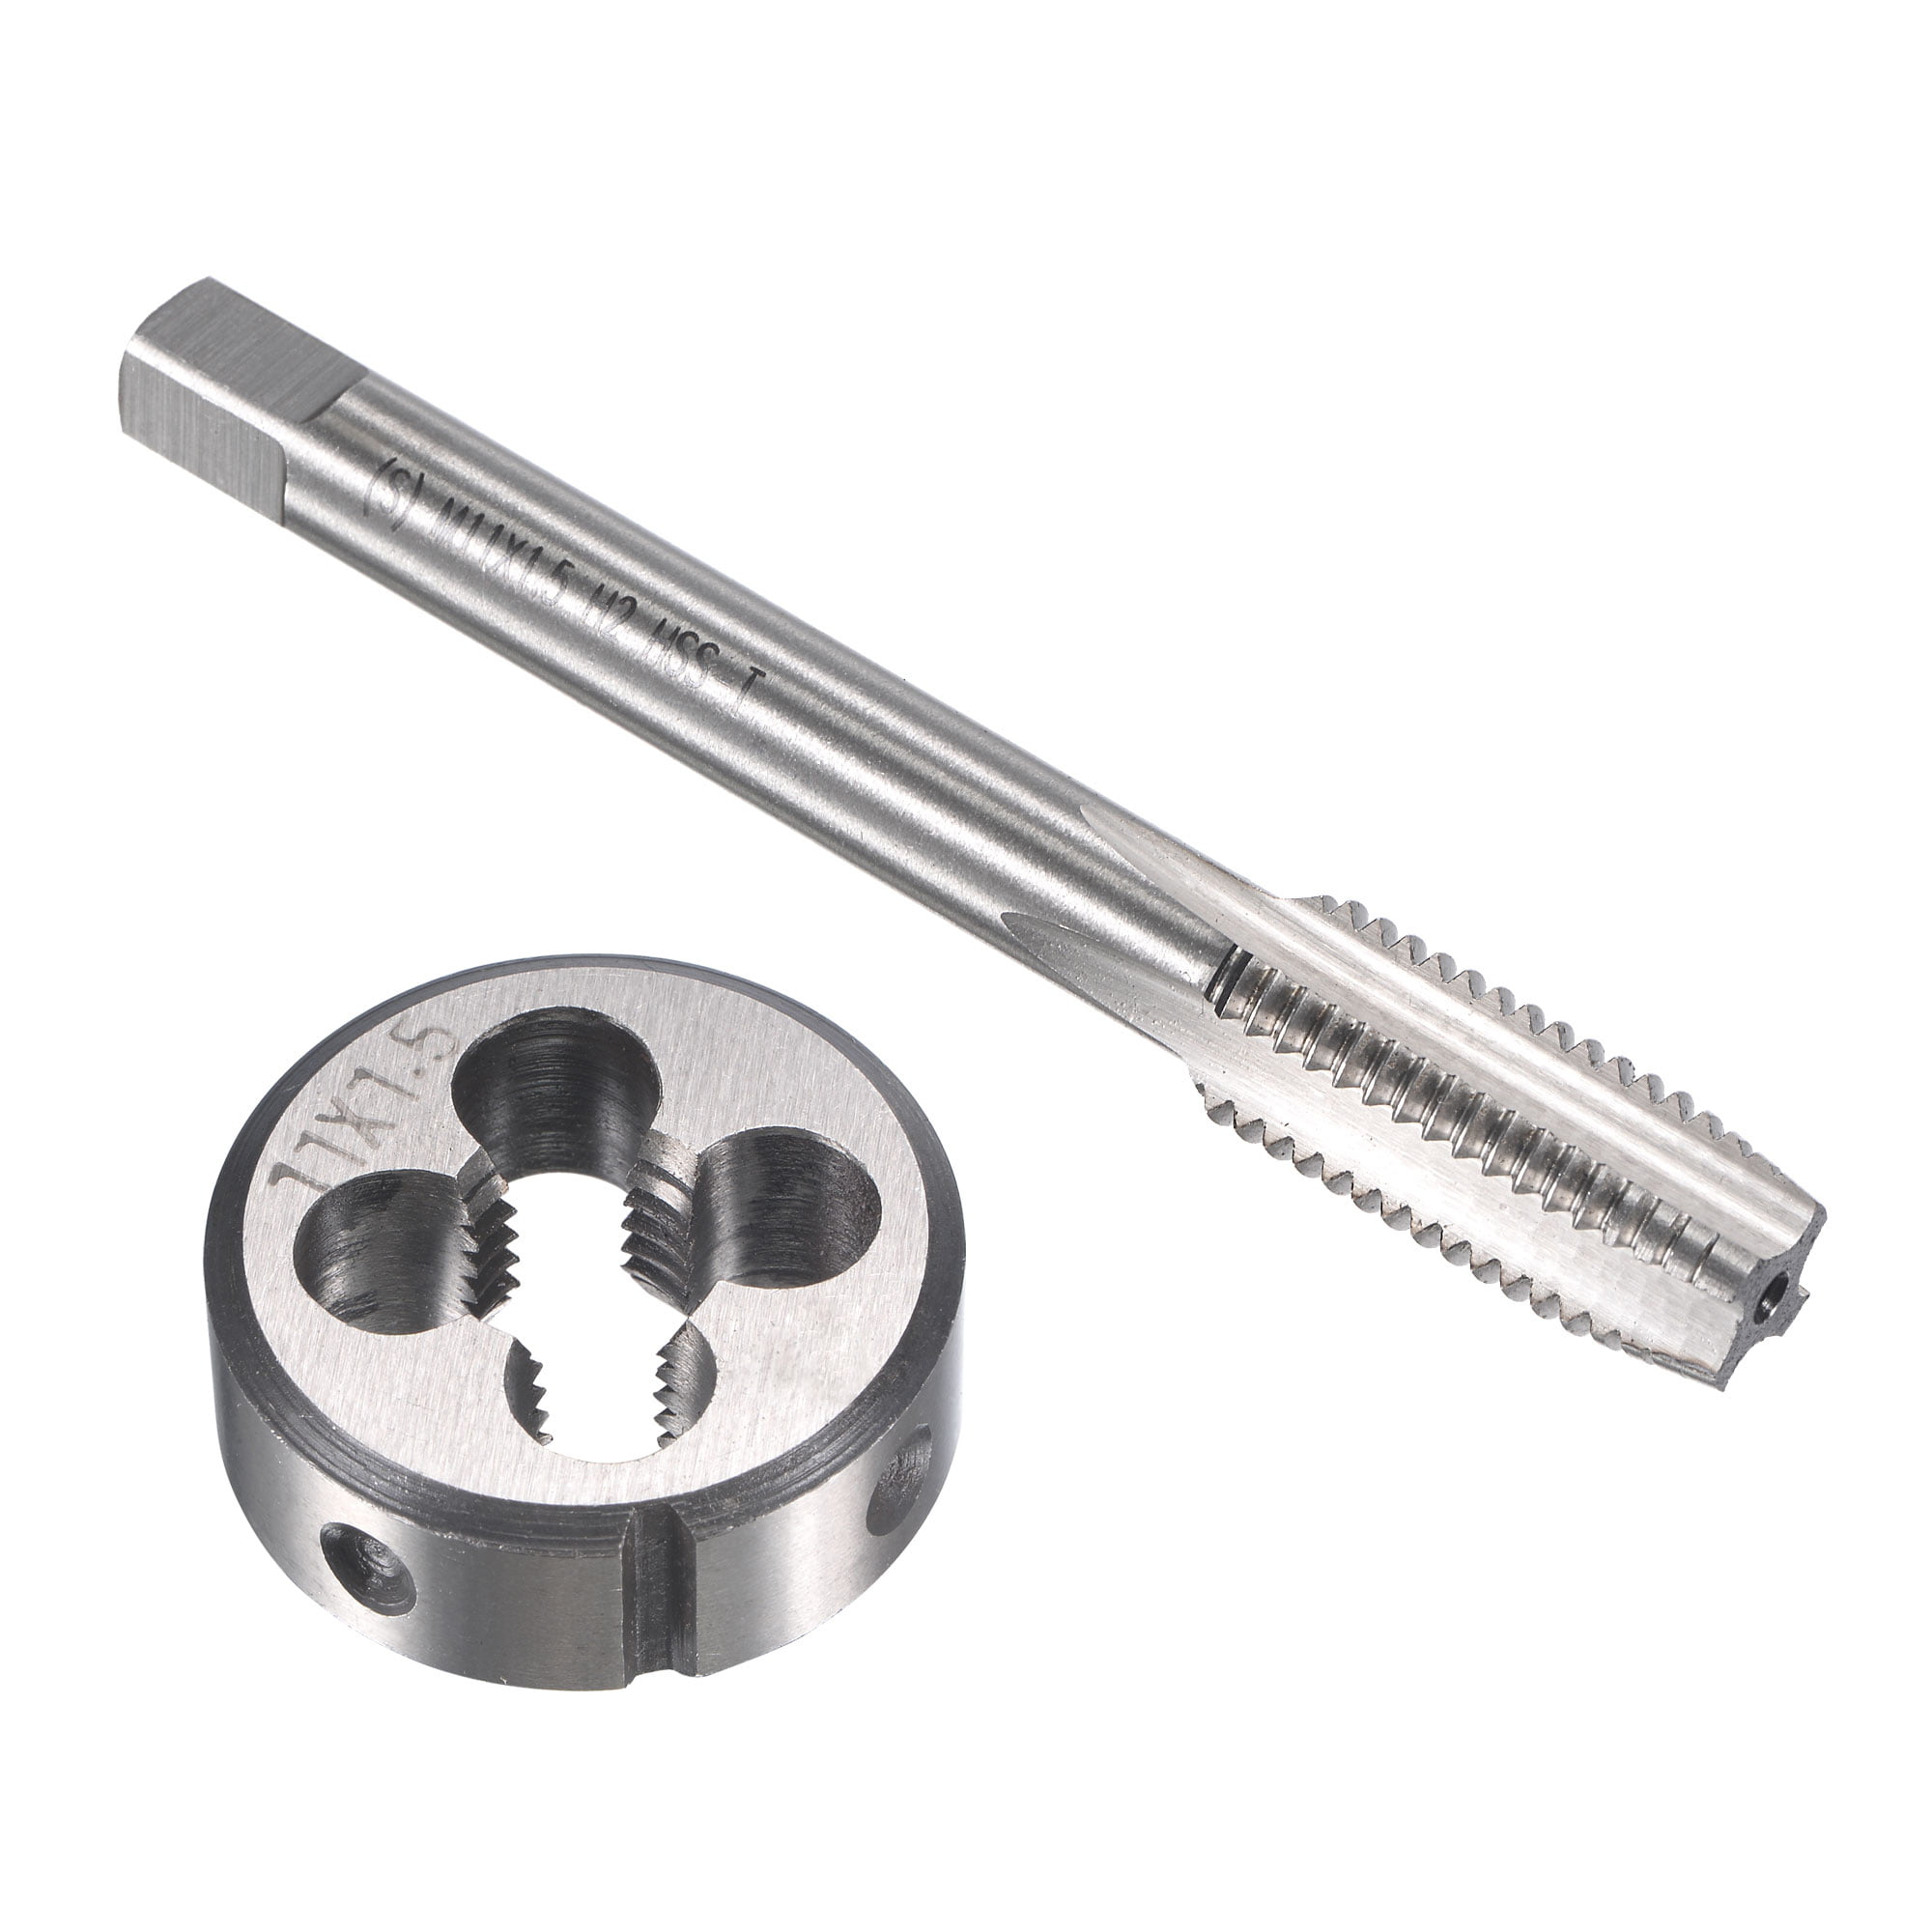 M10 M12 x 0.75mm 1mm 1.25mm 1.5mm 1.75mm Taper and Plug Metric Tap Pitch For 